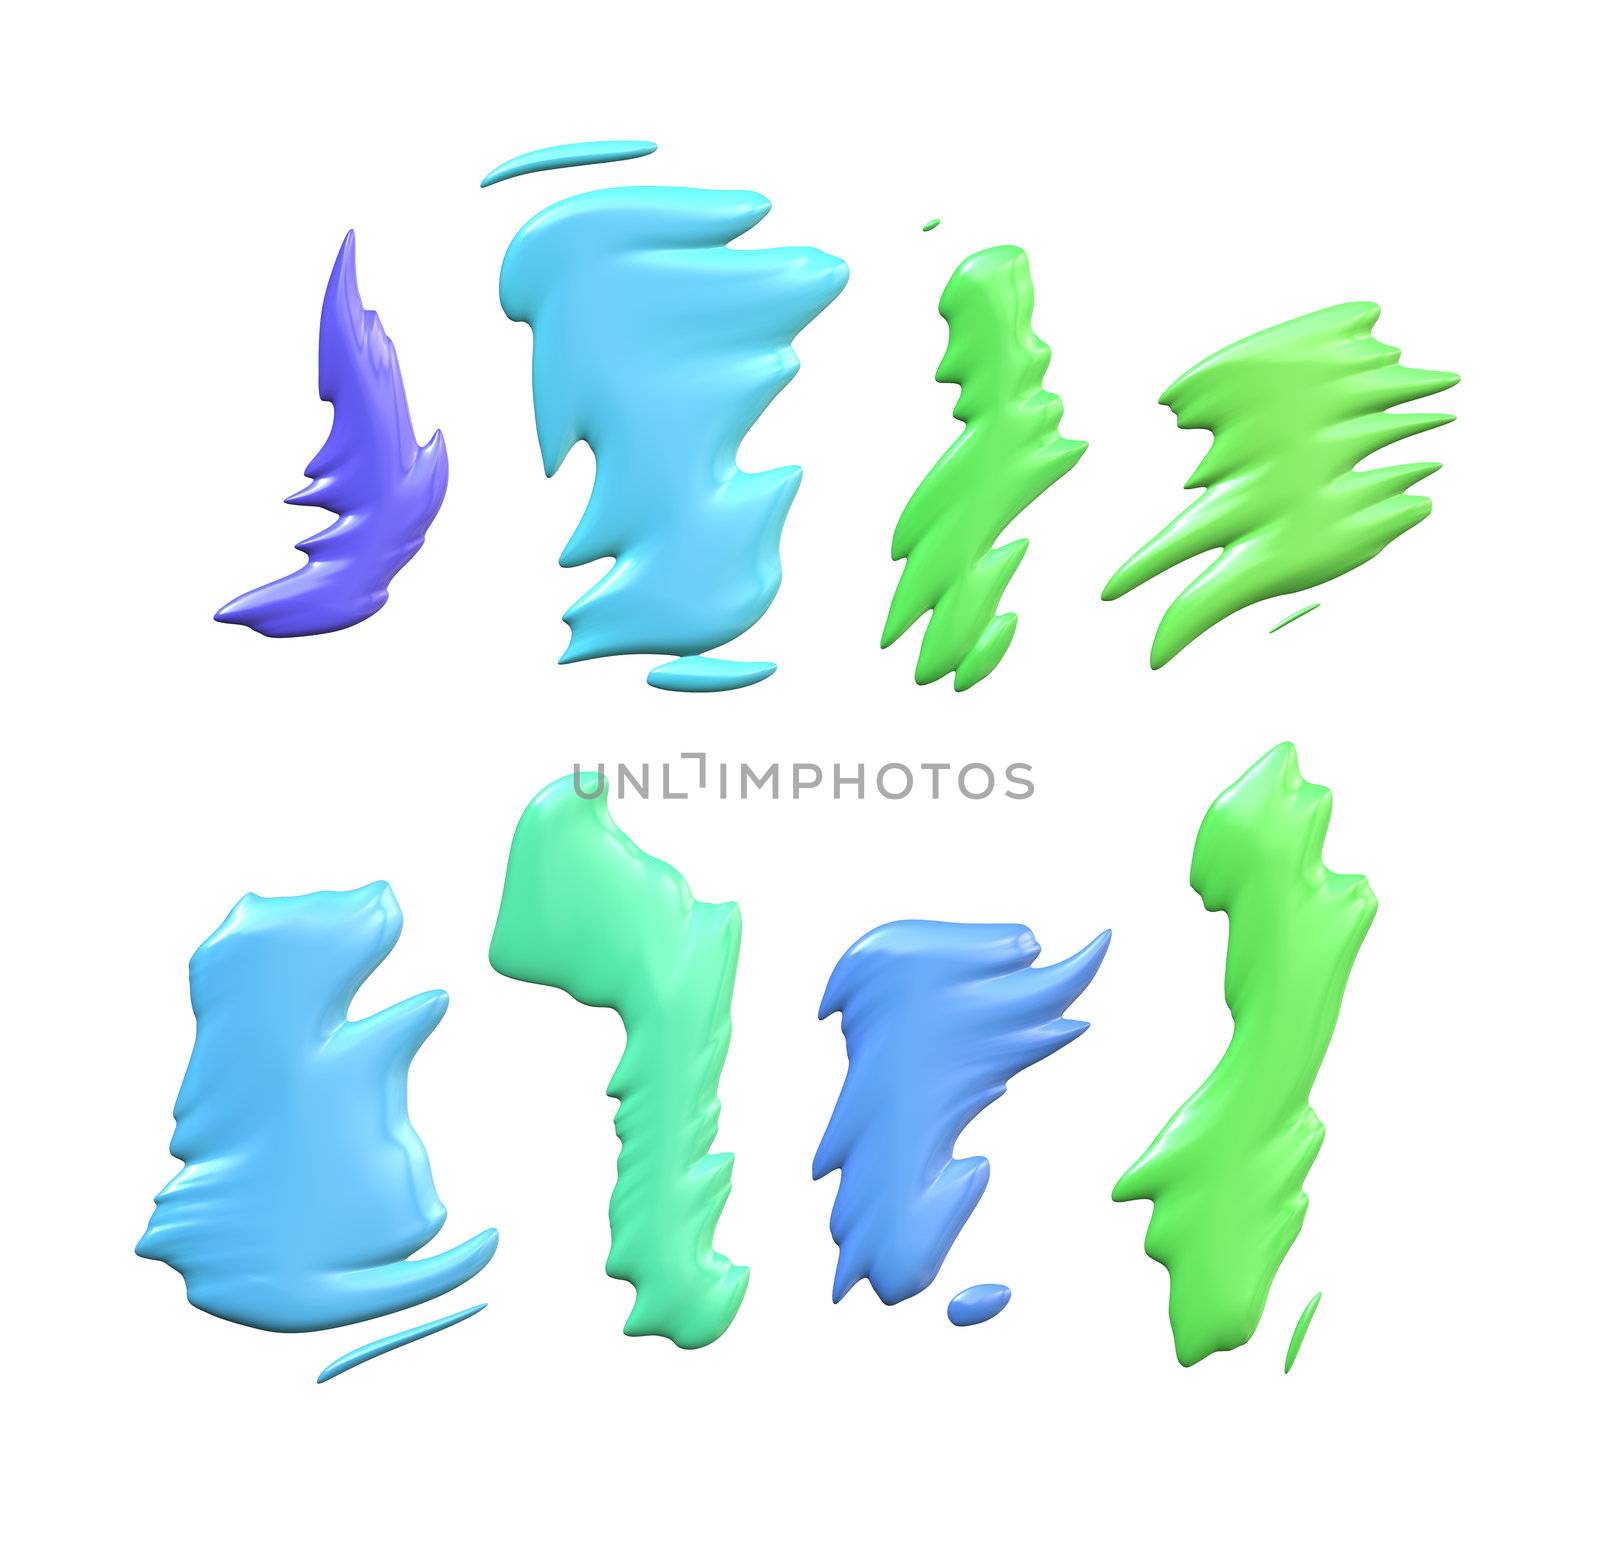 An illustration of 8 nice abstract color splashes